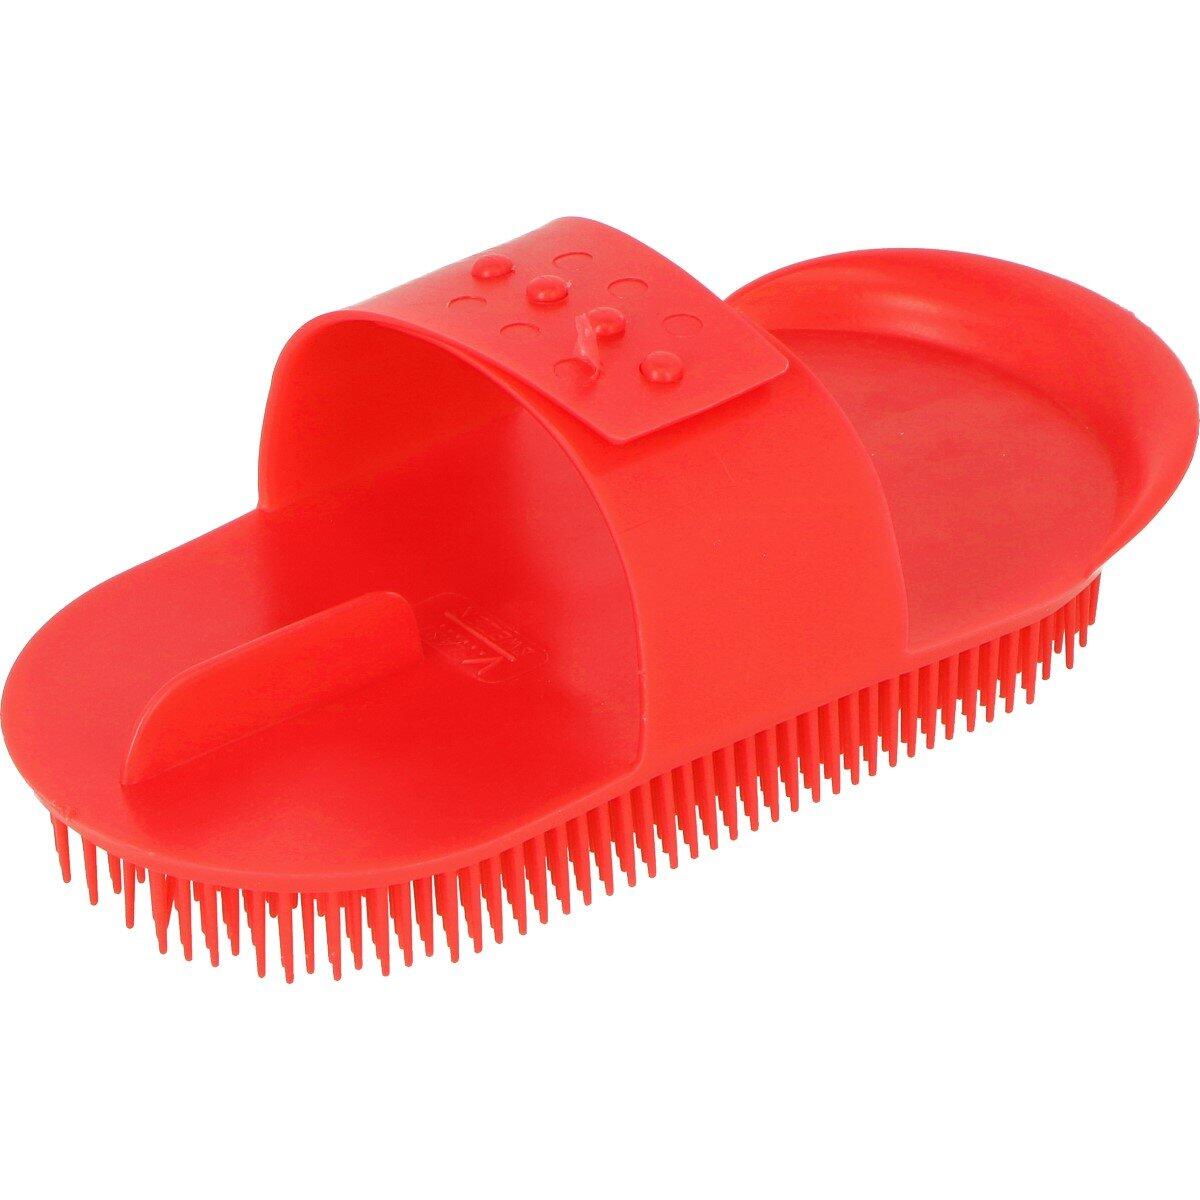 Plastic Horse Curry Comb (Red) 1/4